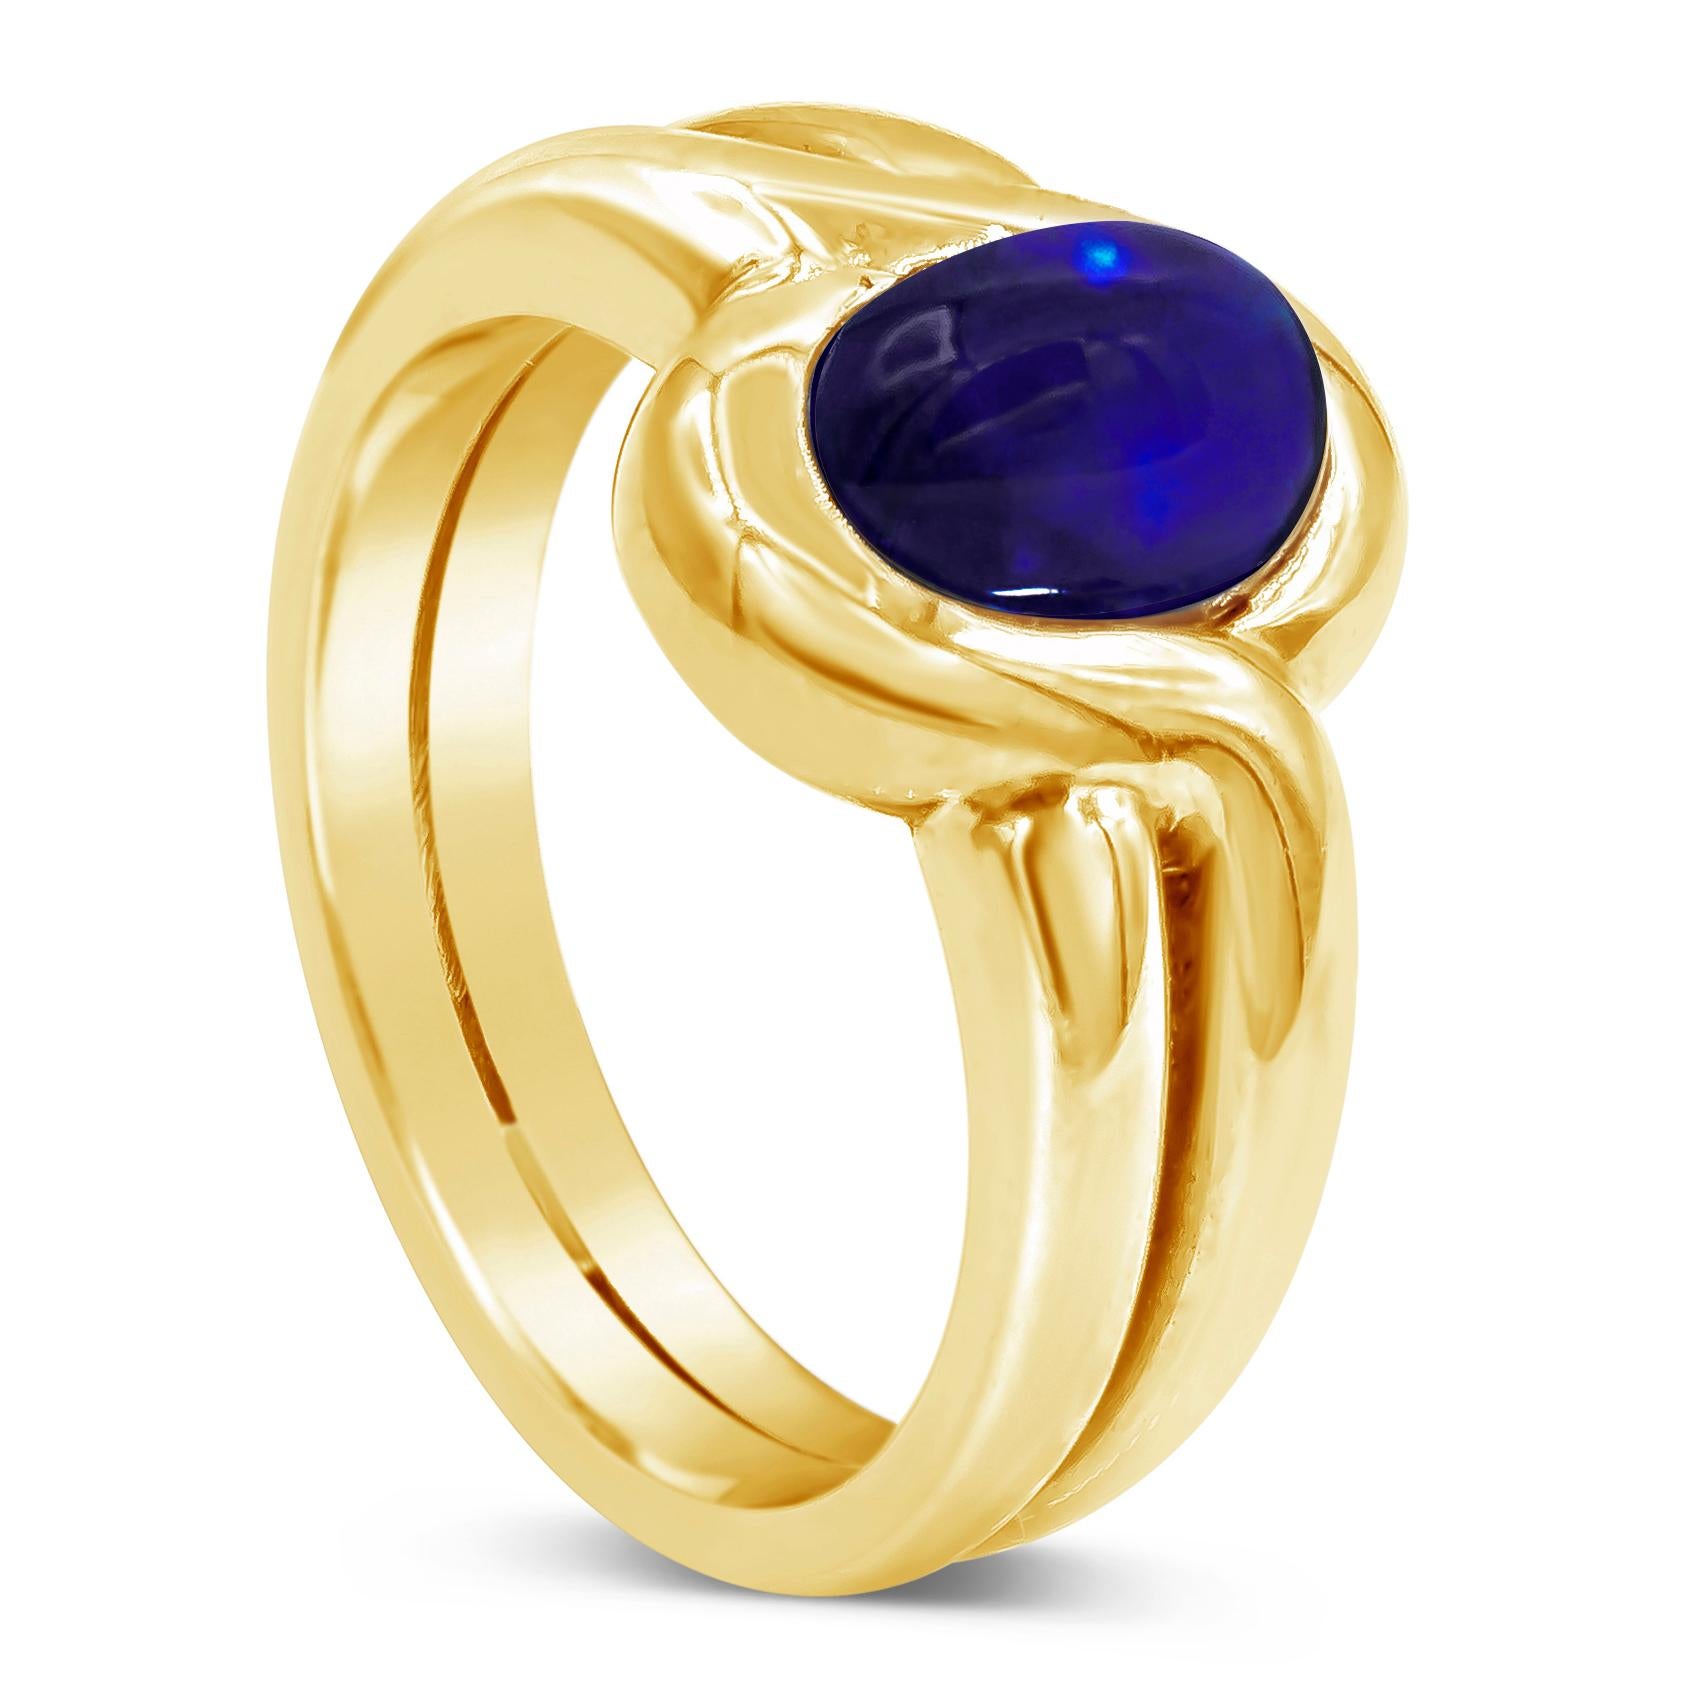 Antique gemstone fashion ring showcasing a 2.50 carat oval shape blue sapphire cabochon in the center. Set in an integrated bezel, made in 18K Yellow Gold. Size 8 US and resizable upon request. 
